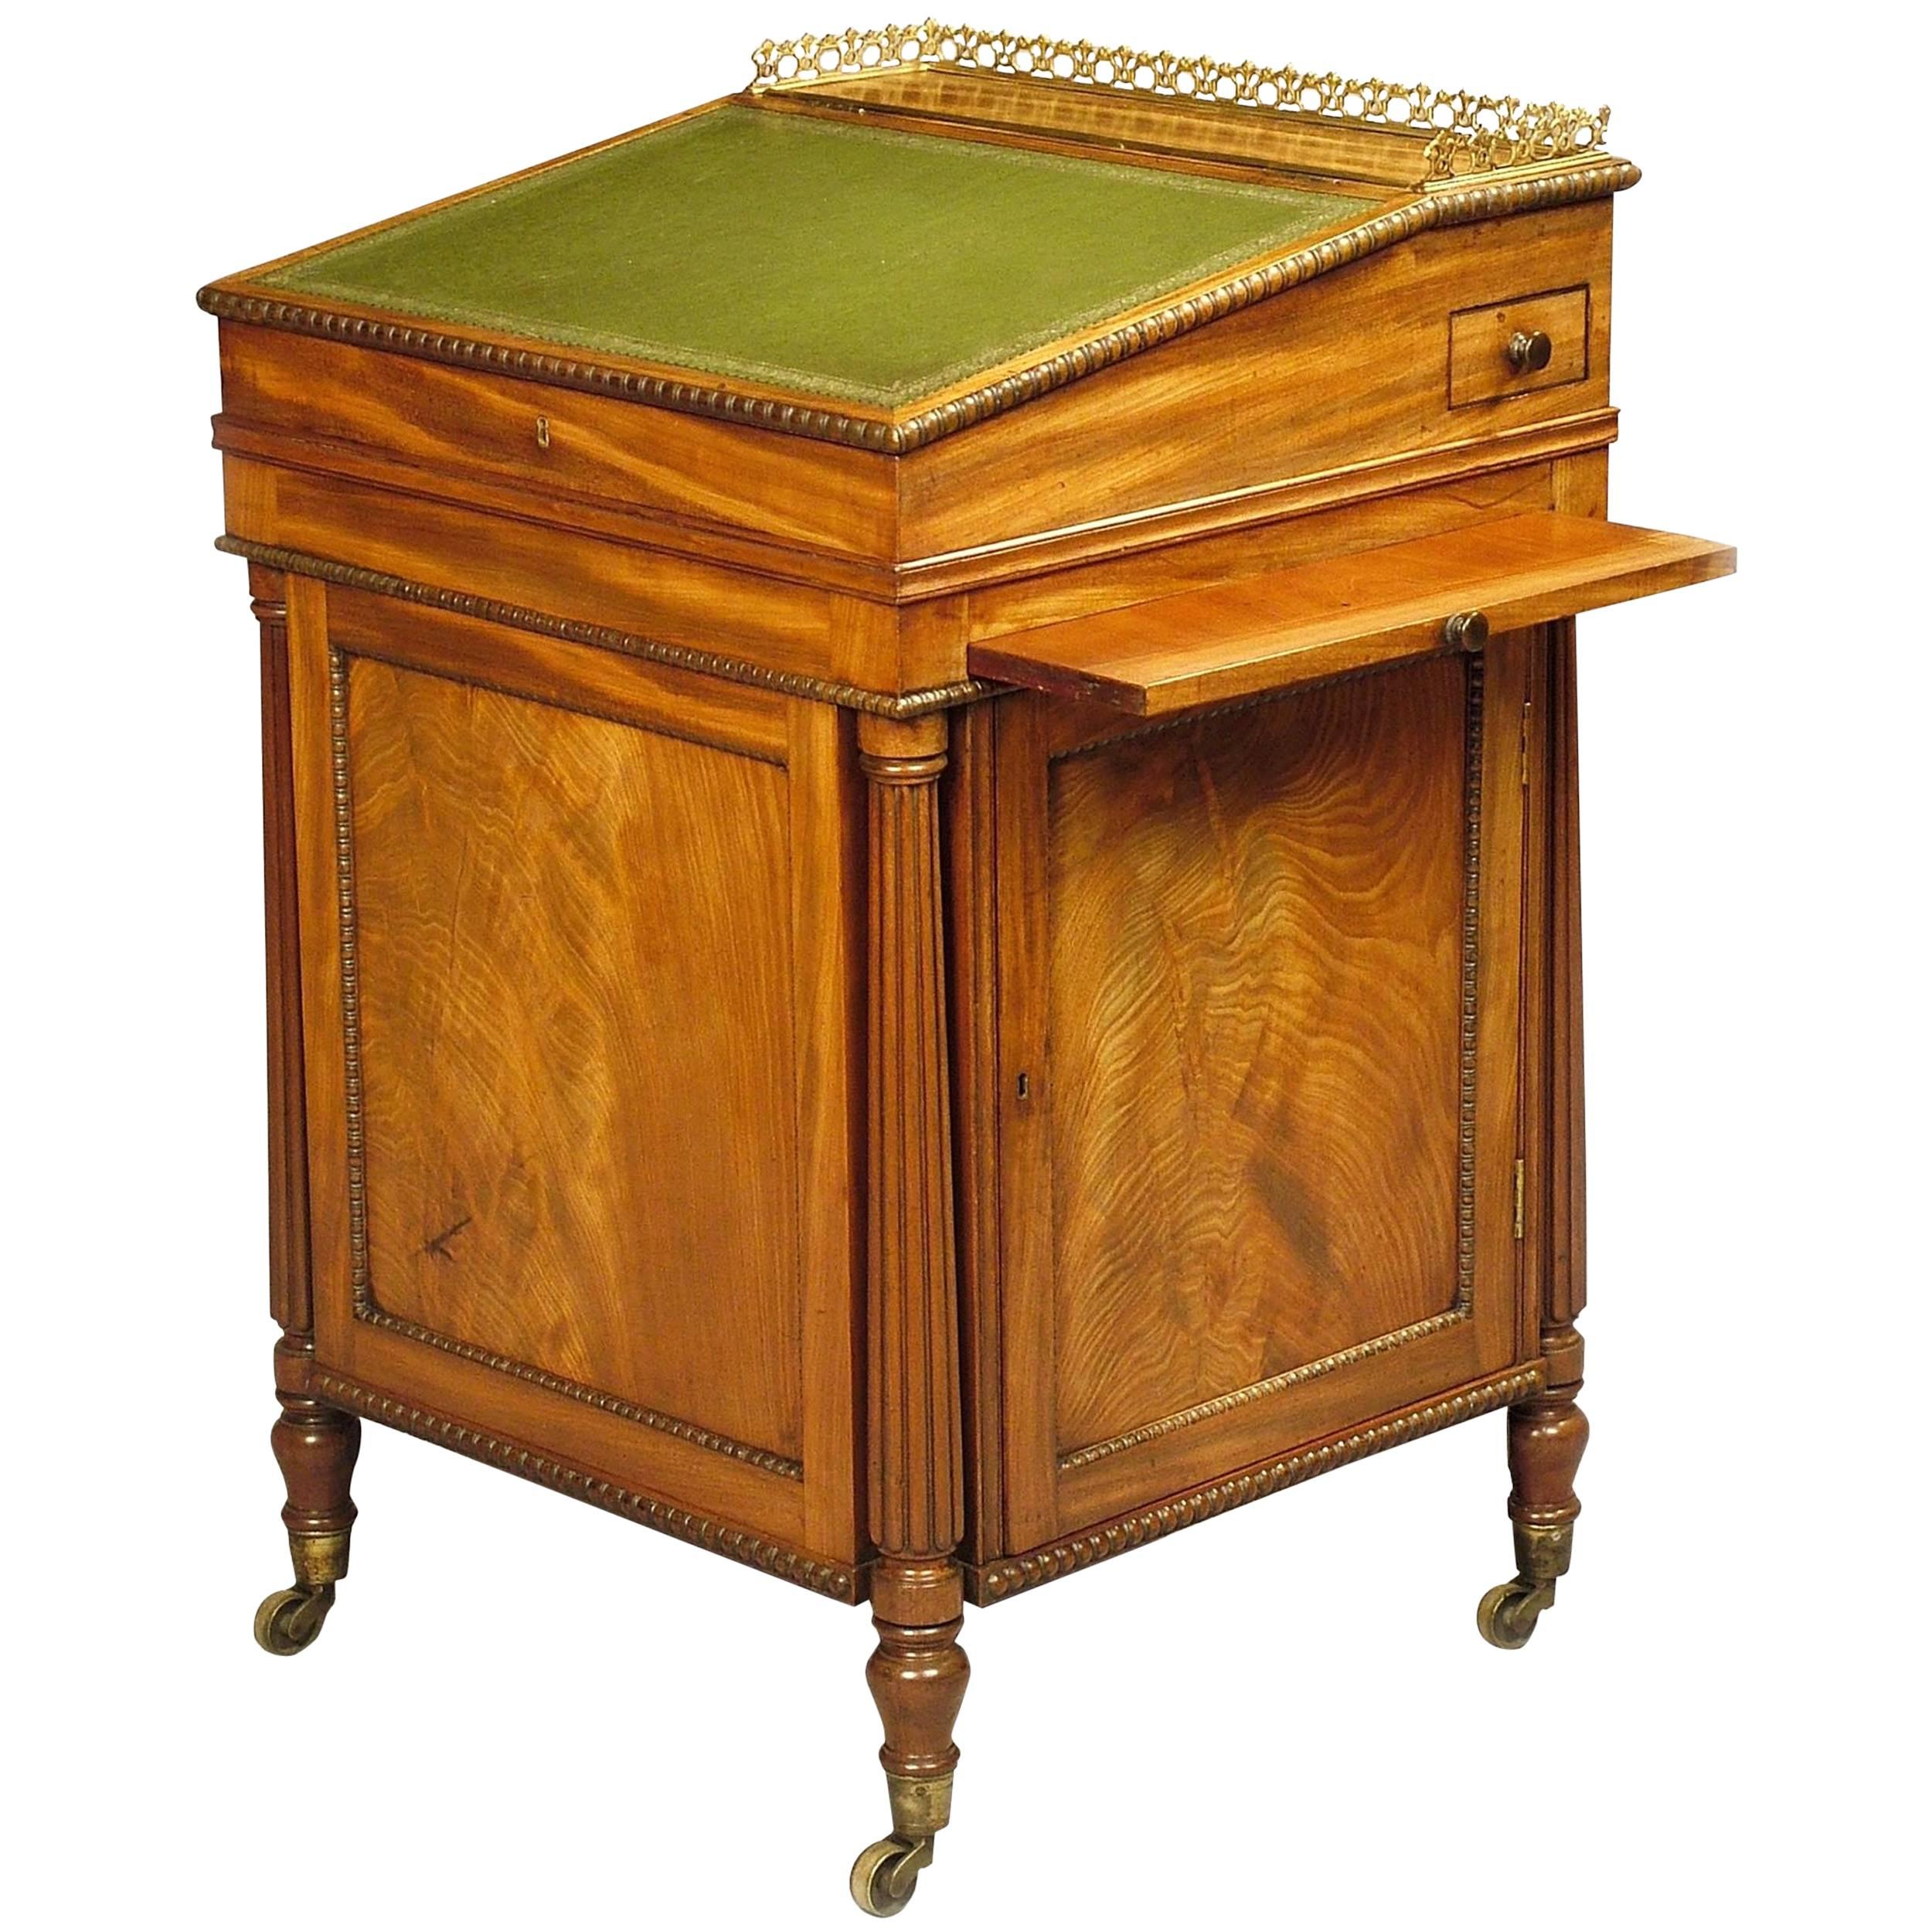 Georgian Period Mahogany Davenport Desk with Green Leather Writing Surface For Sale